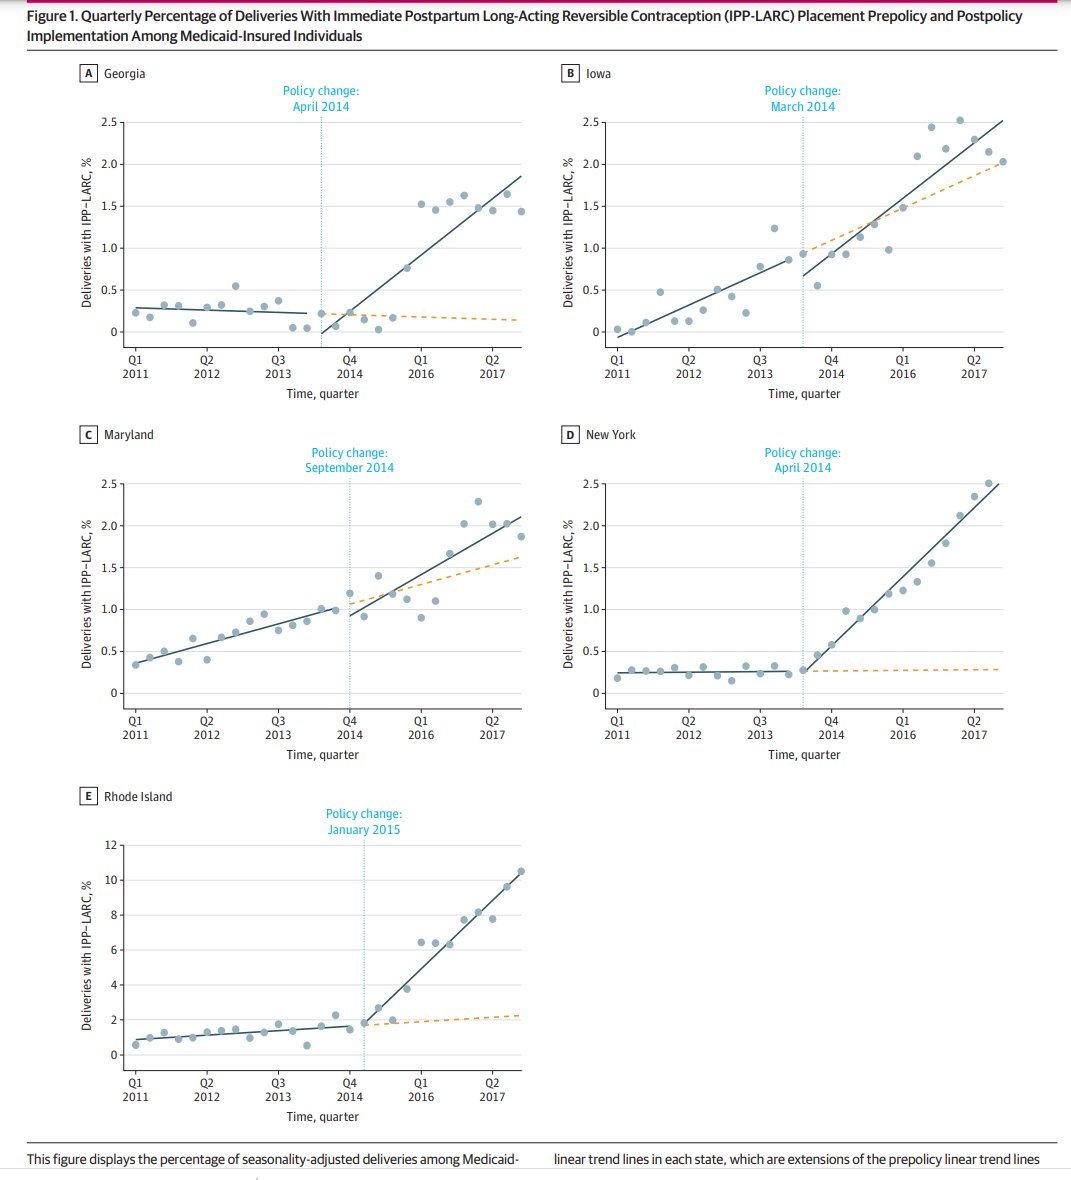 Immediate Postpartum Long-Acting Reversible Contraceptive Use Following State-Specific Changes in Hospital Medicaid Reimbursement ja.ma/3VN4DyF via @JAMANetworkOpen part of @JAMANetwork #CardioObstetrics